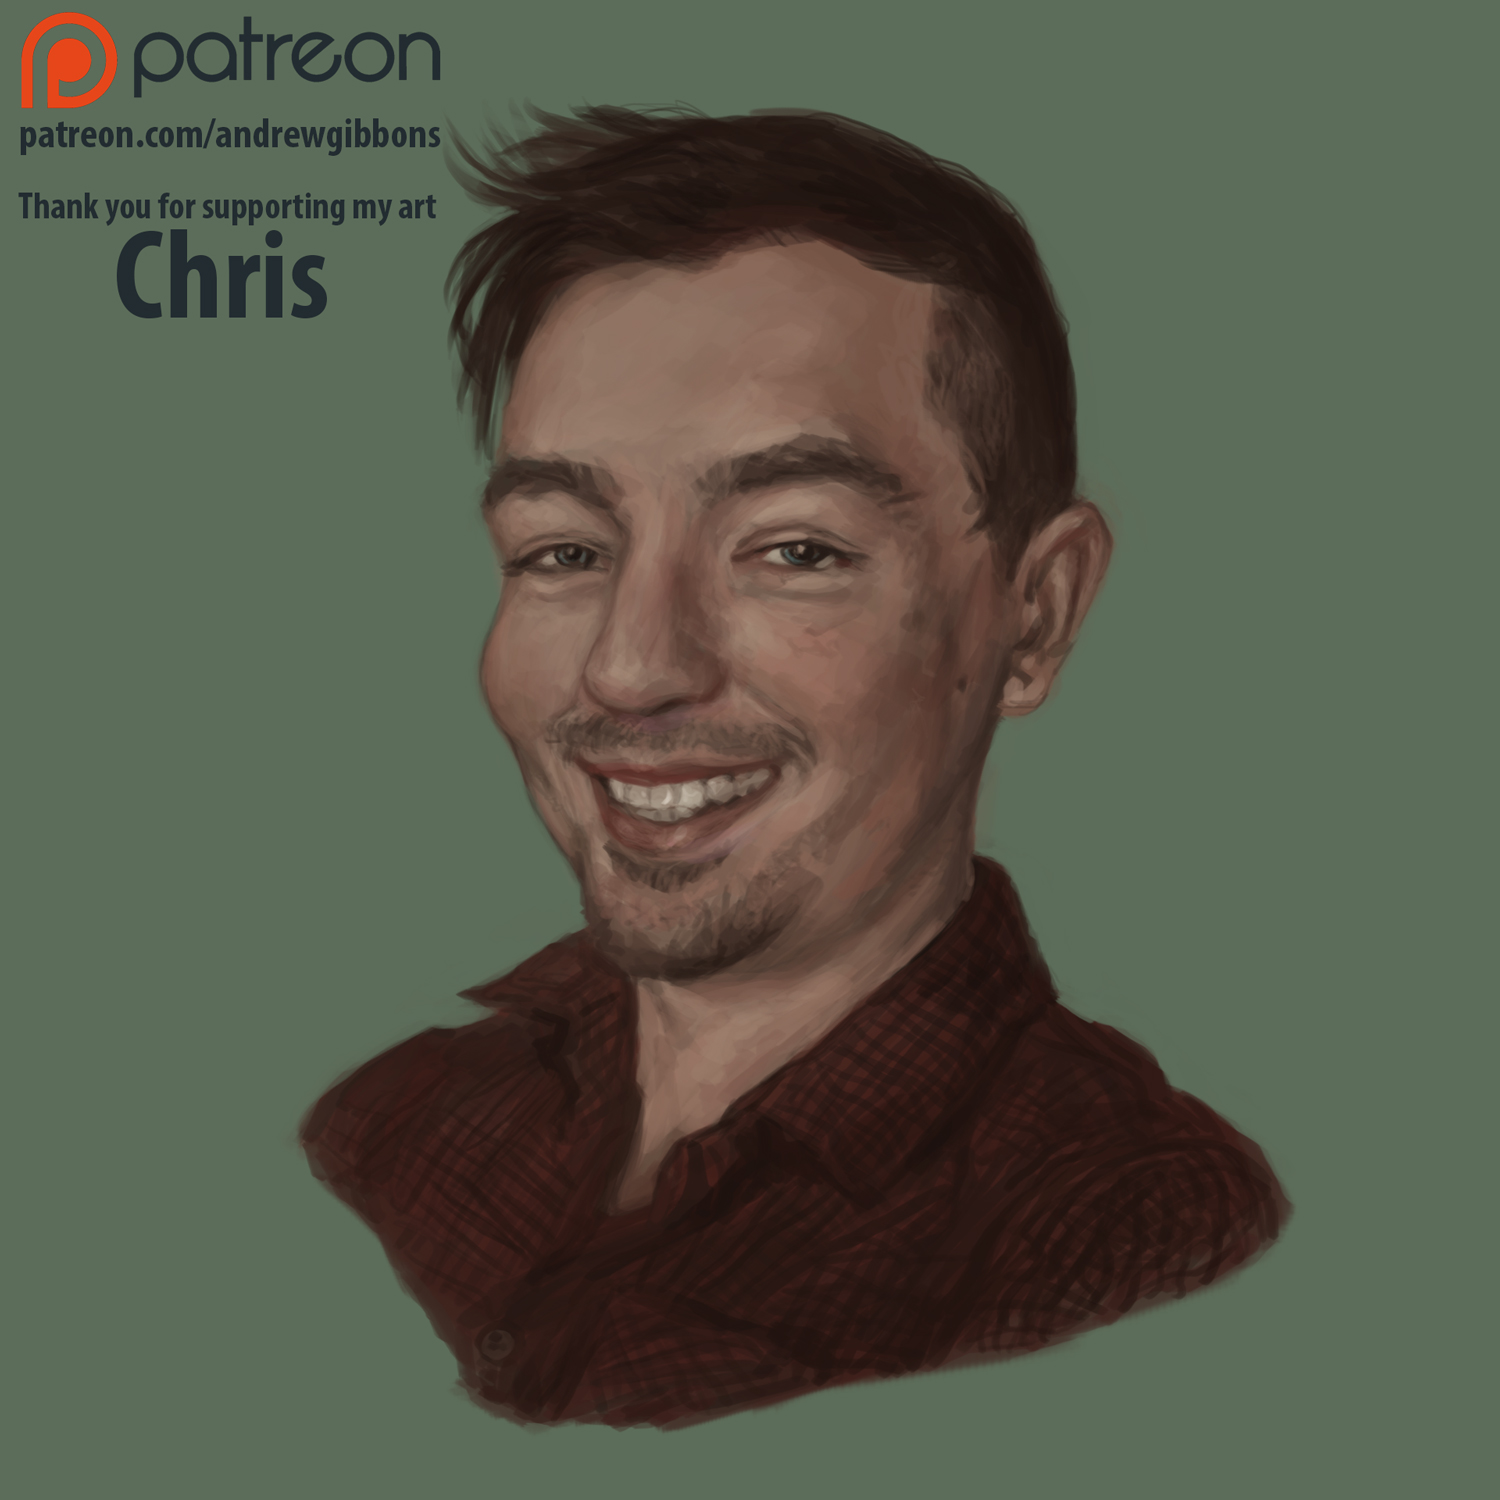 [Image: patron_portrait___chris_by_andrew_gibbons-dbg9n56.jpg]